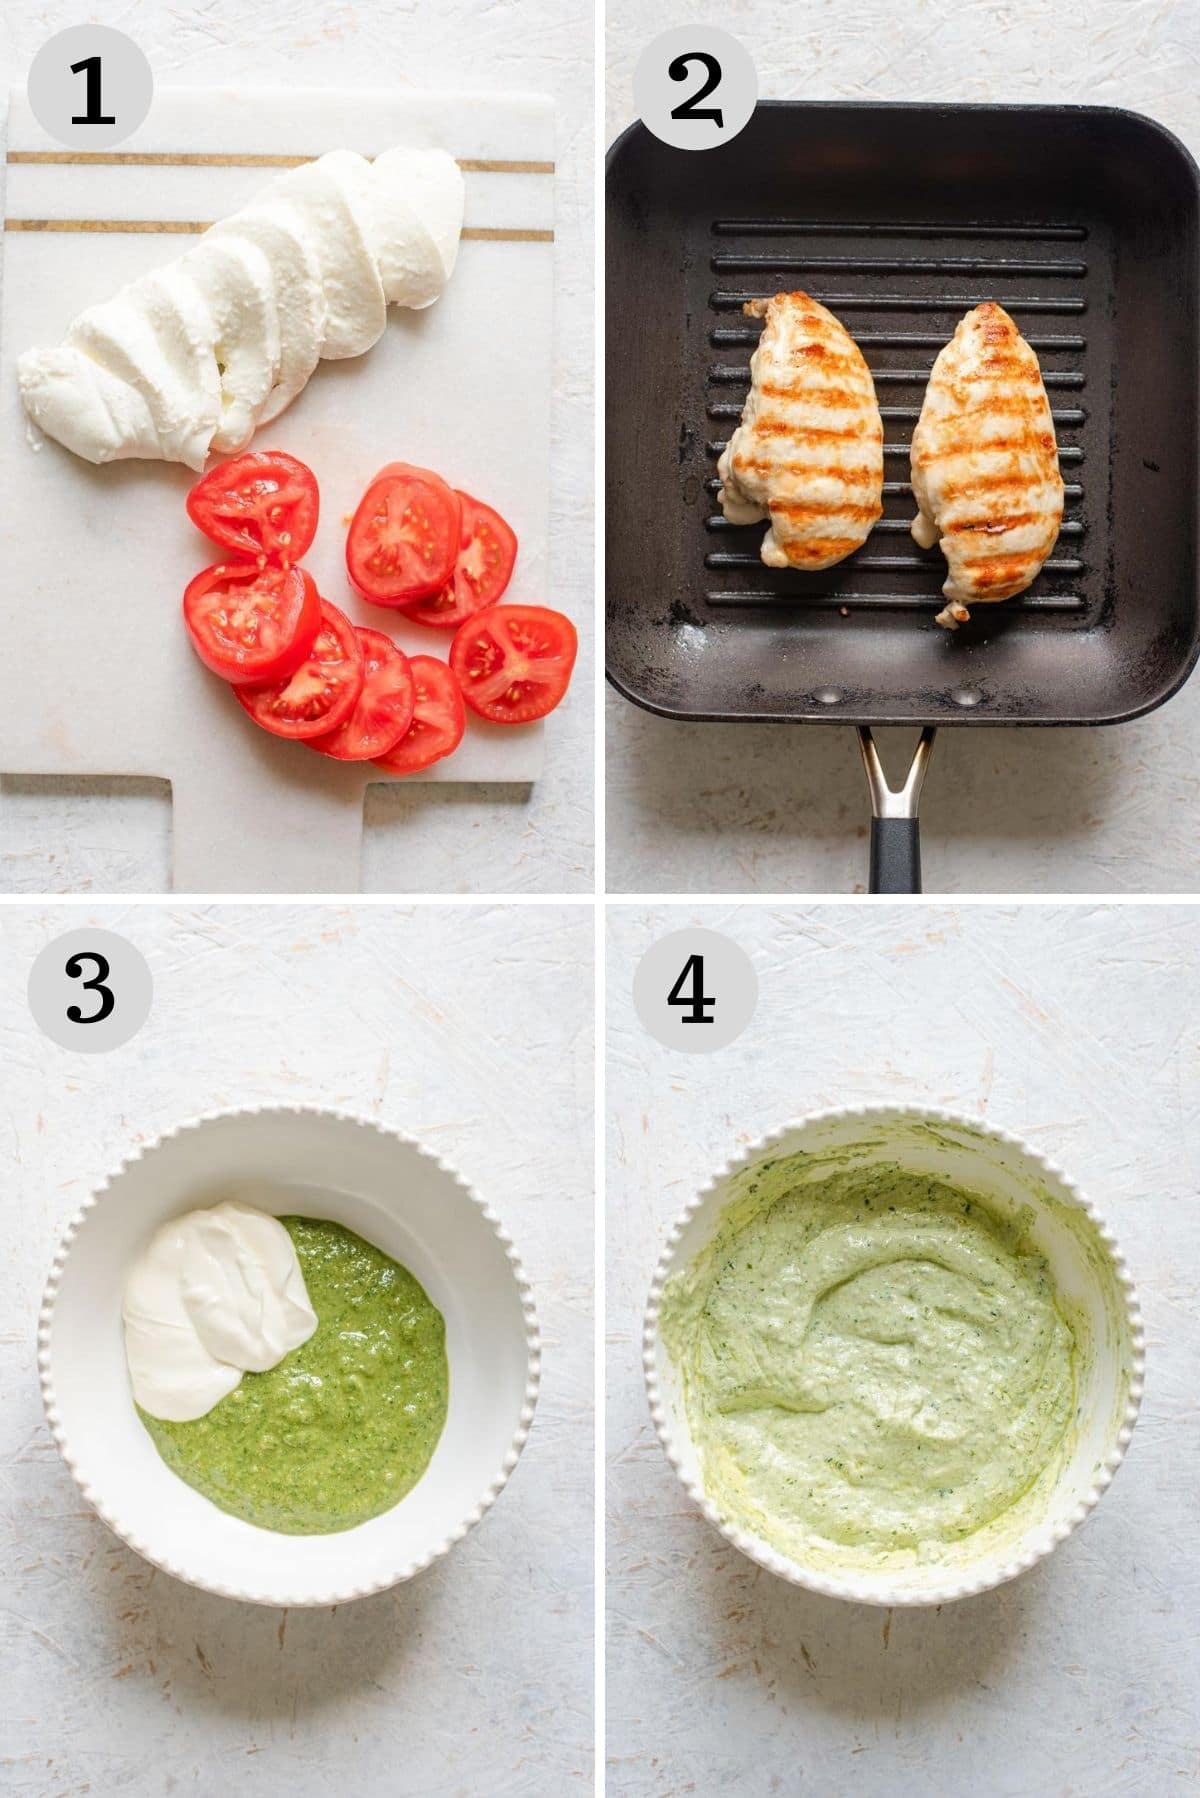 Step by step photos showing how to prepare ingredients to make a chicken ciabatta sandwich with pesto